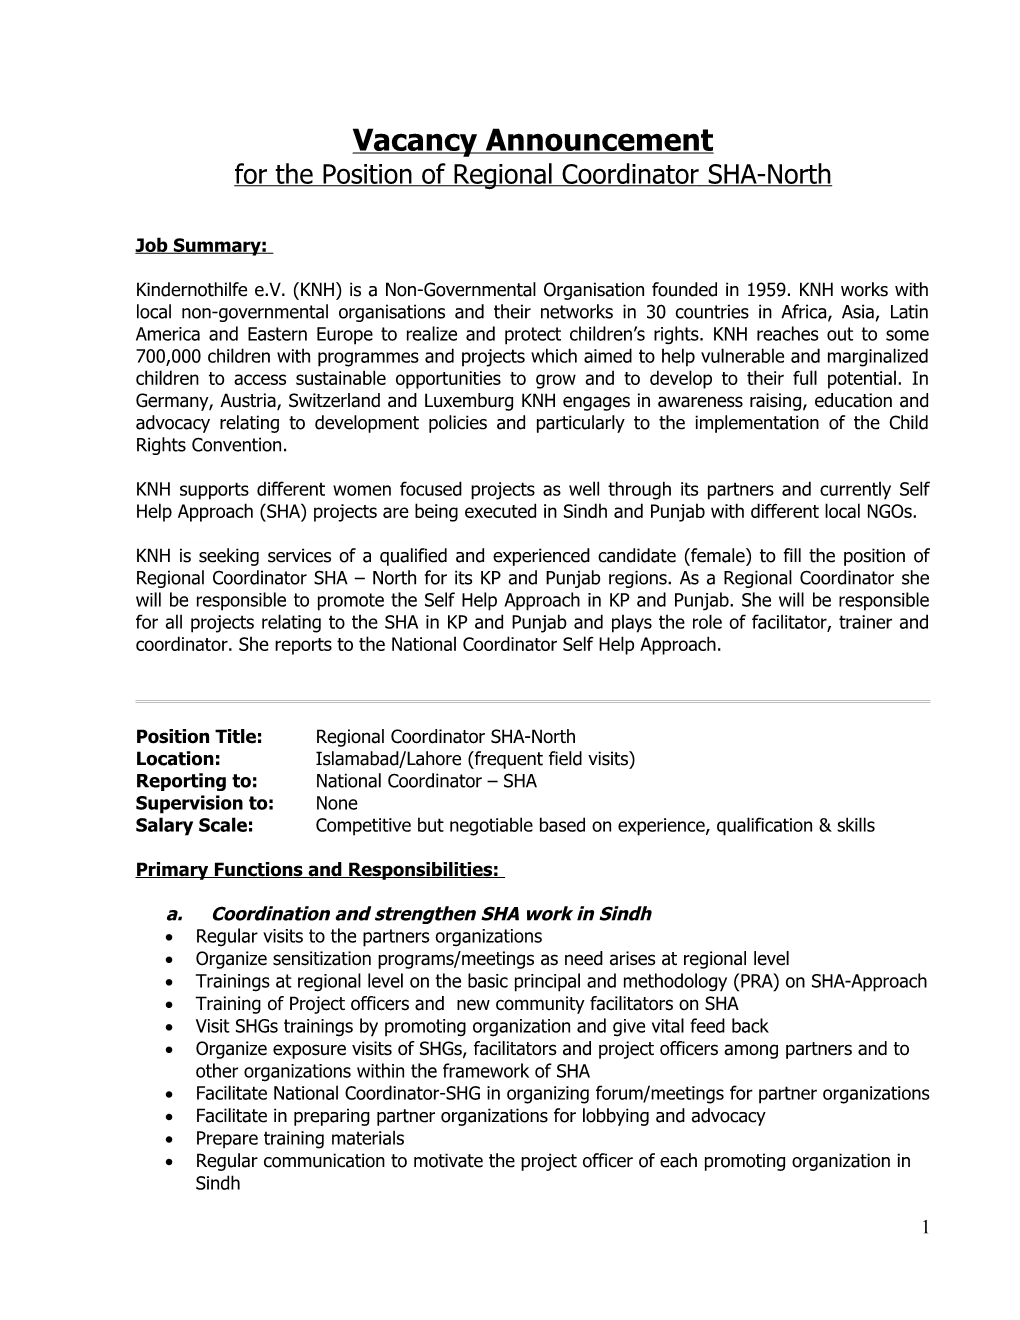 For the Position of Regional Coordinator SHA-North